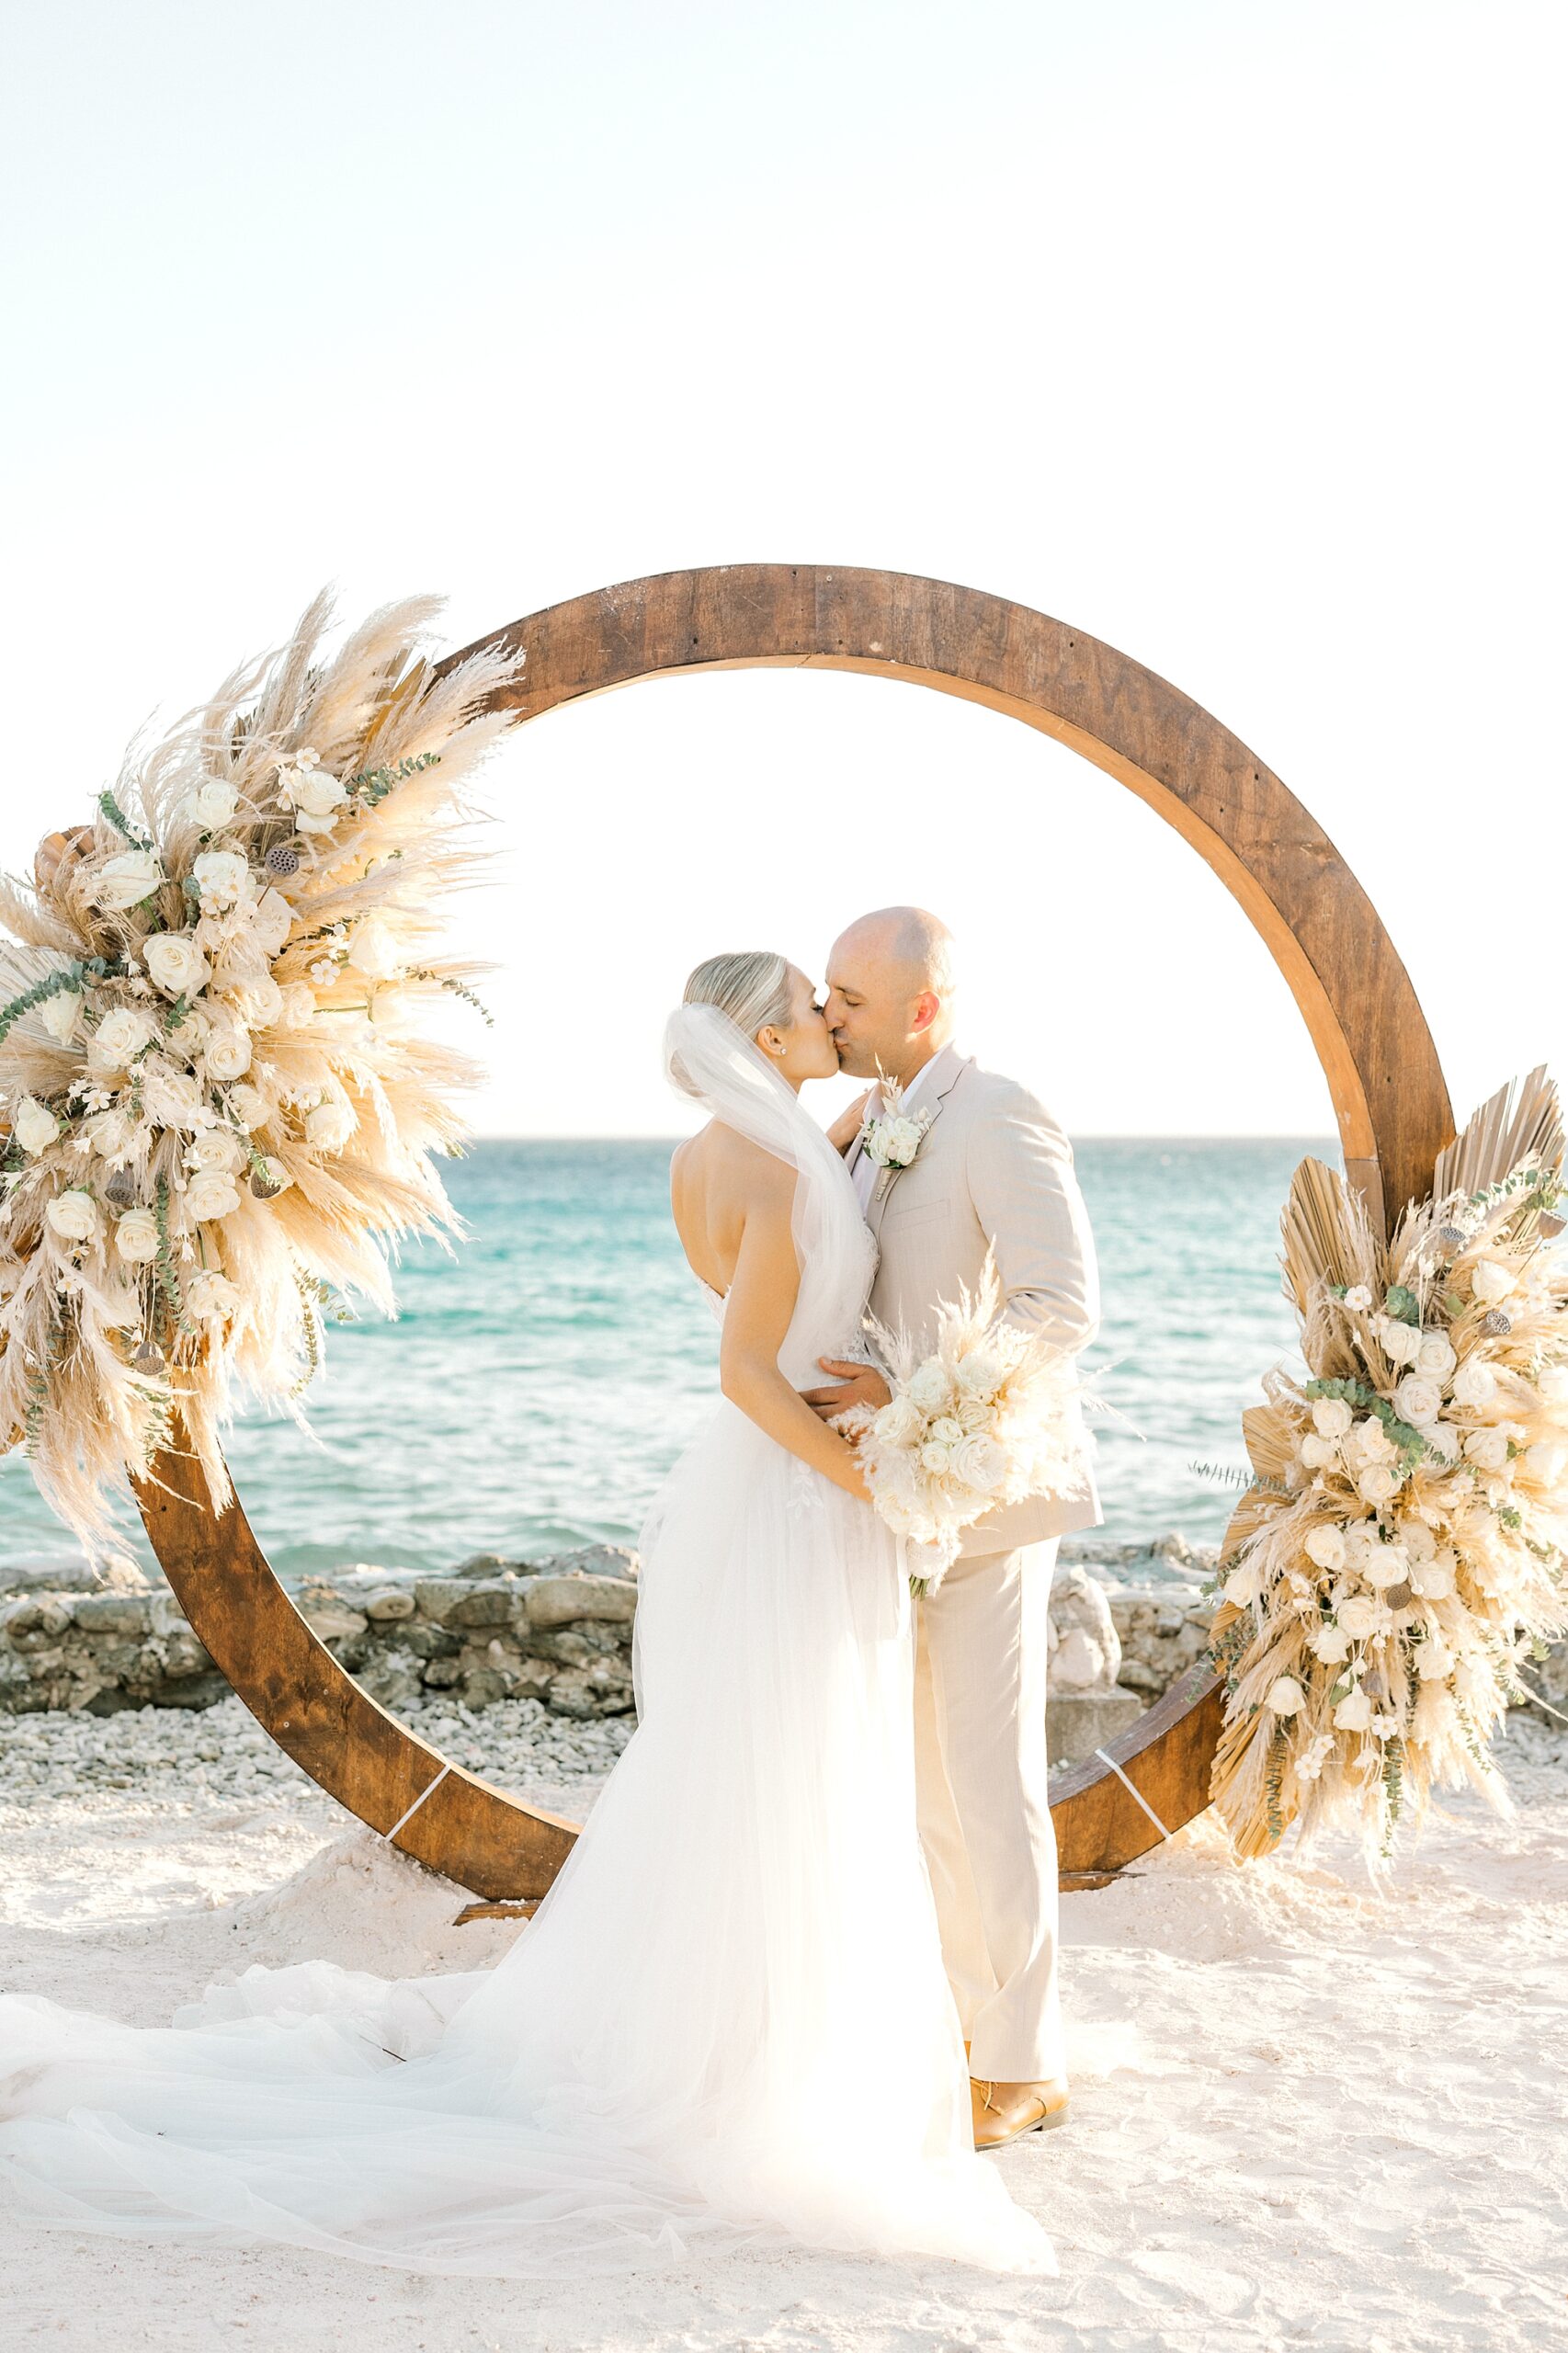 bride and groom kiss in front of wooden circle arbor with ivory and tan flowers